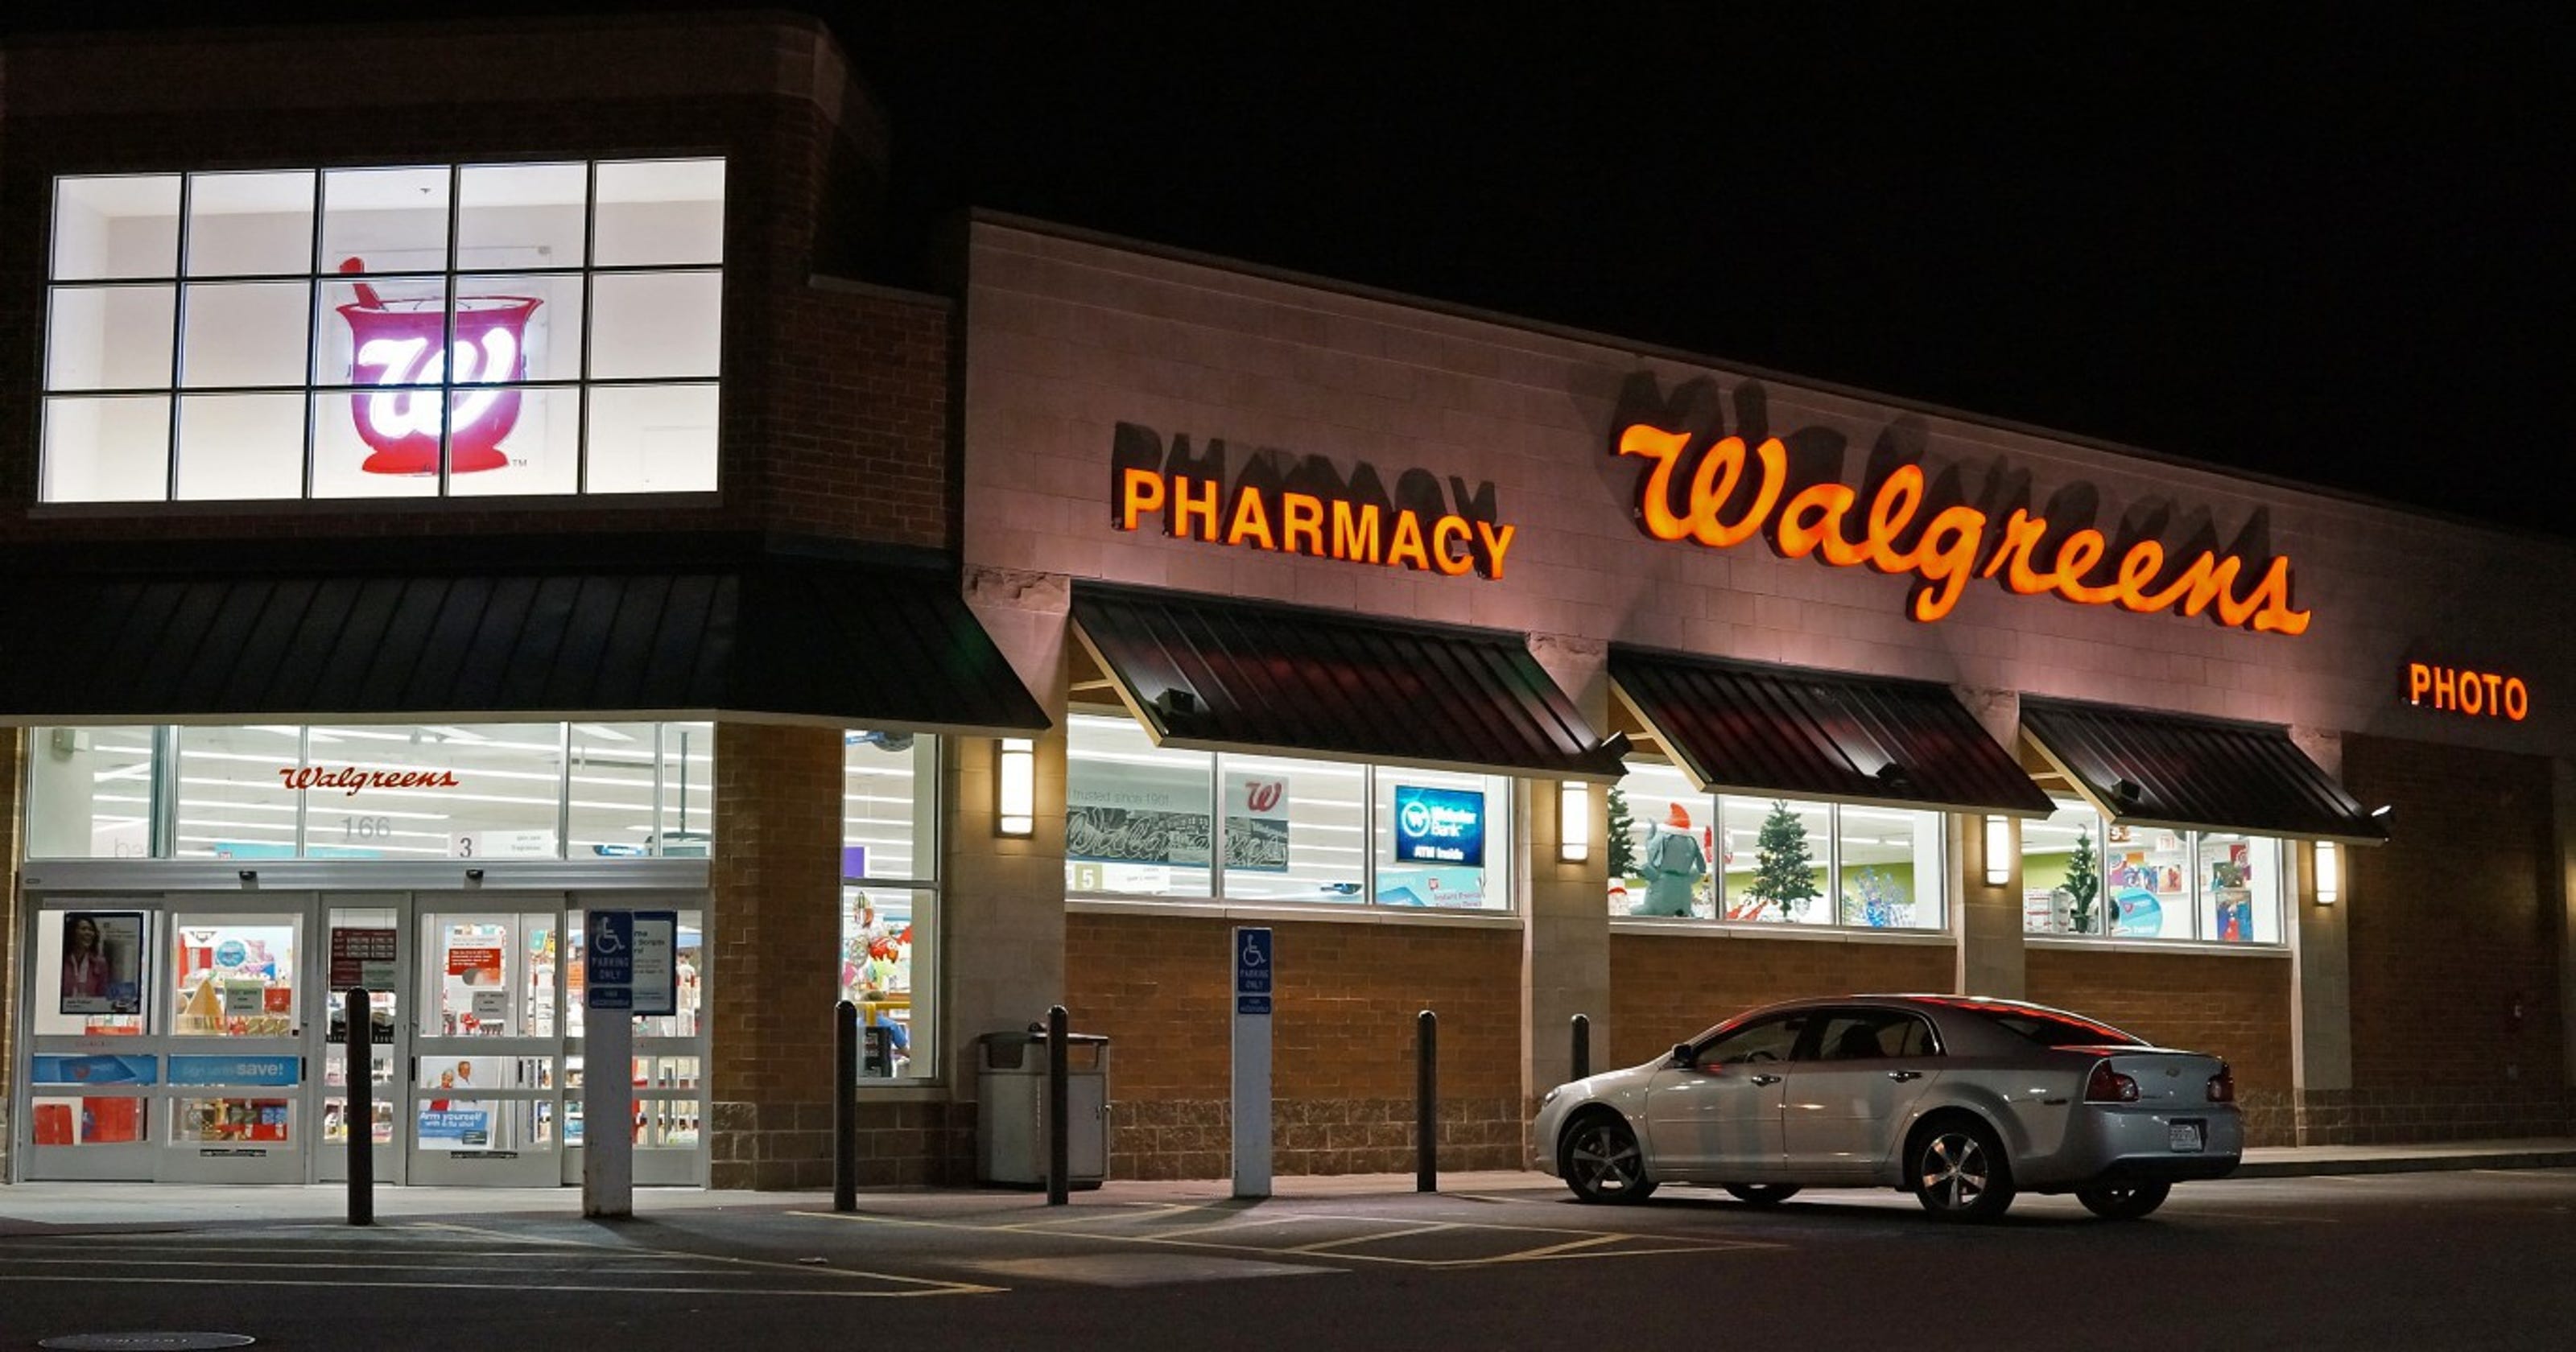 Walgreens launching nextday prescription delivery service with FedEx